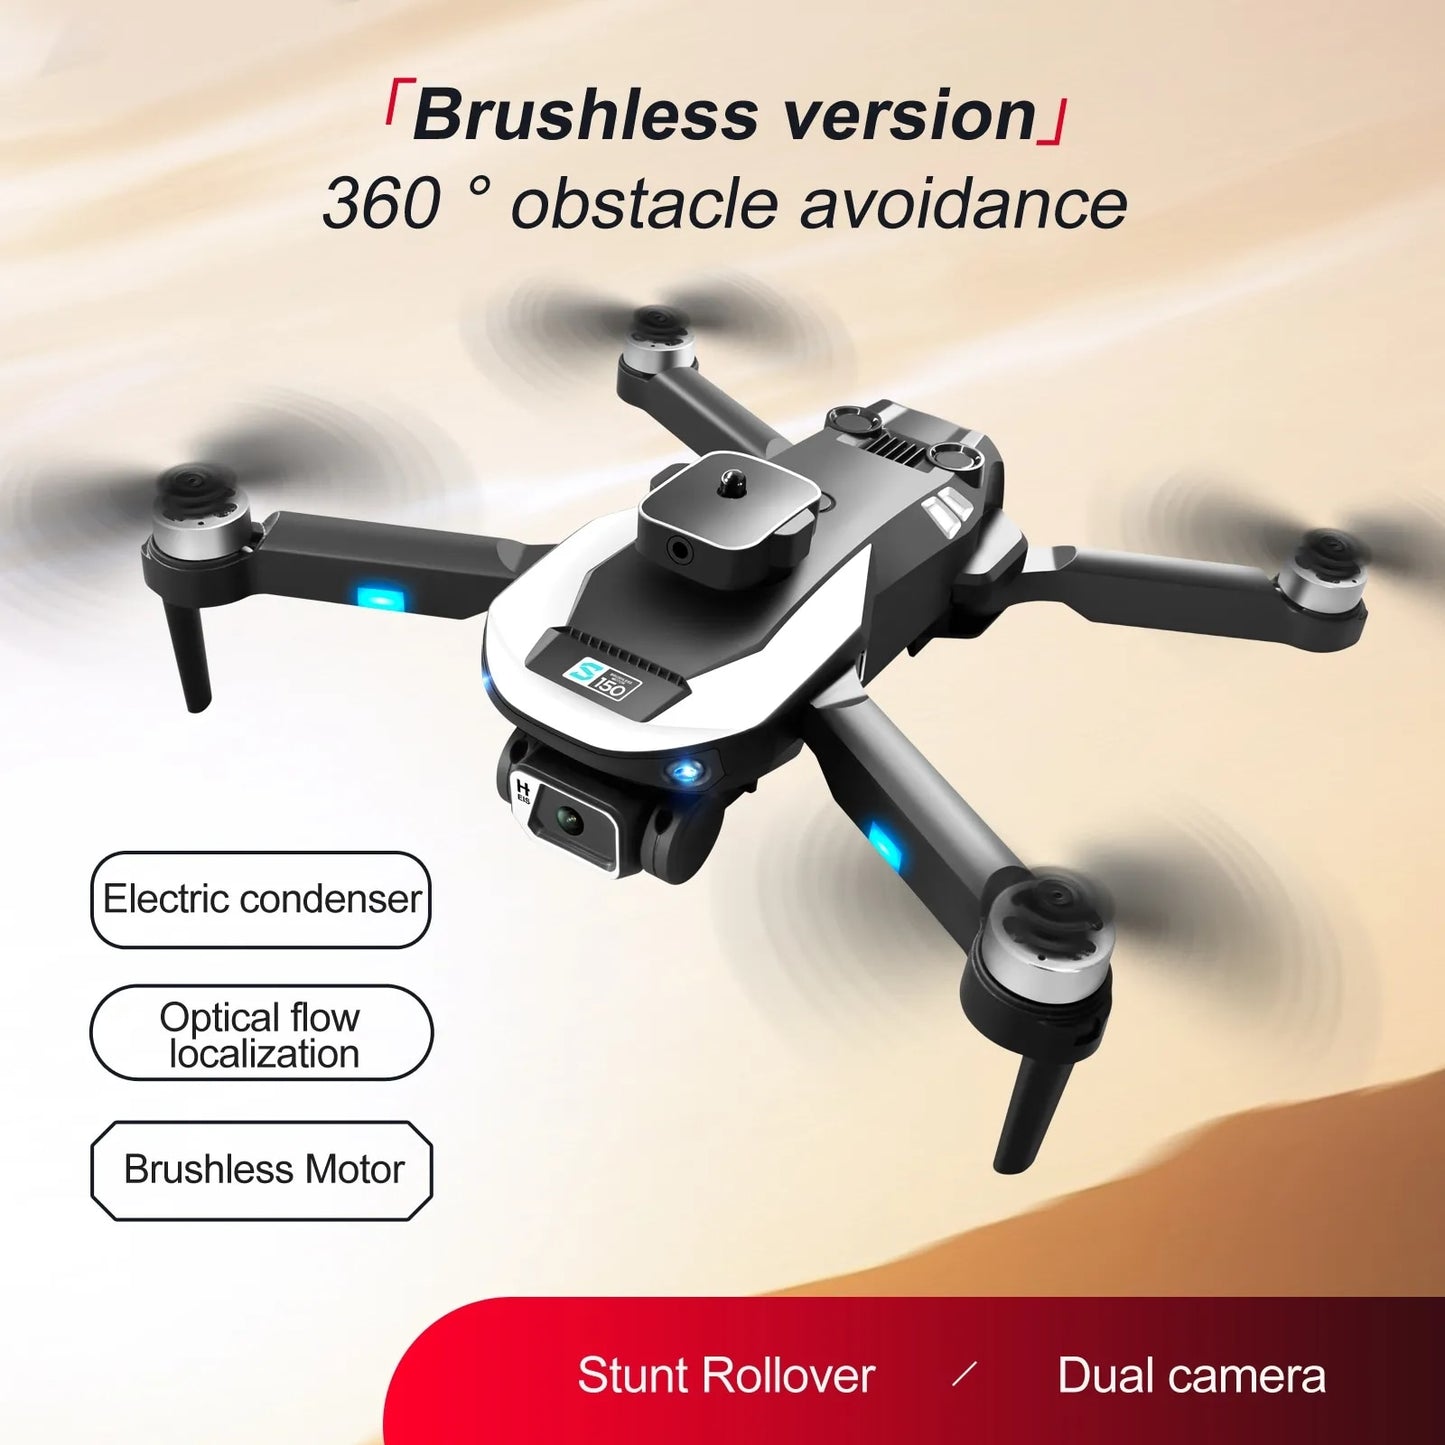 S150 Drone, Brushless version 360 obstacle avoidance Electric condenser Opti